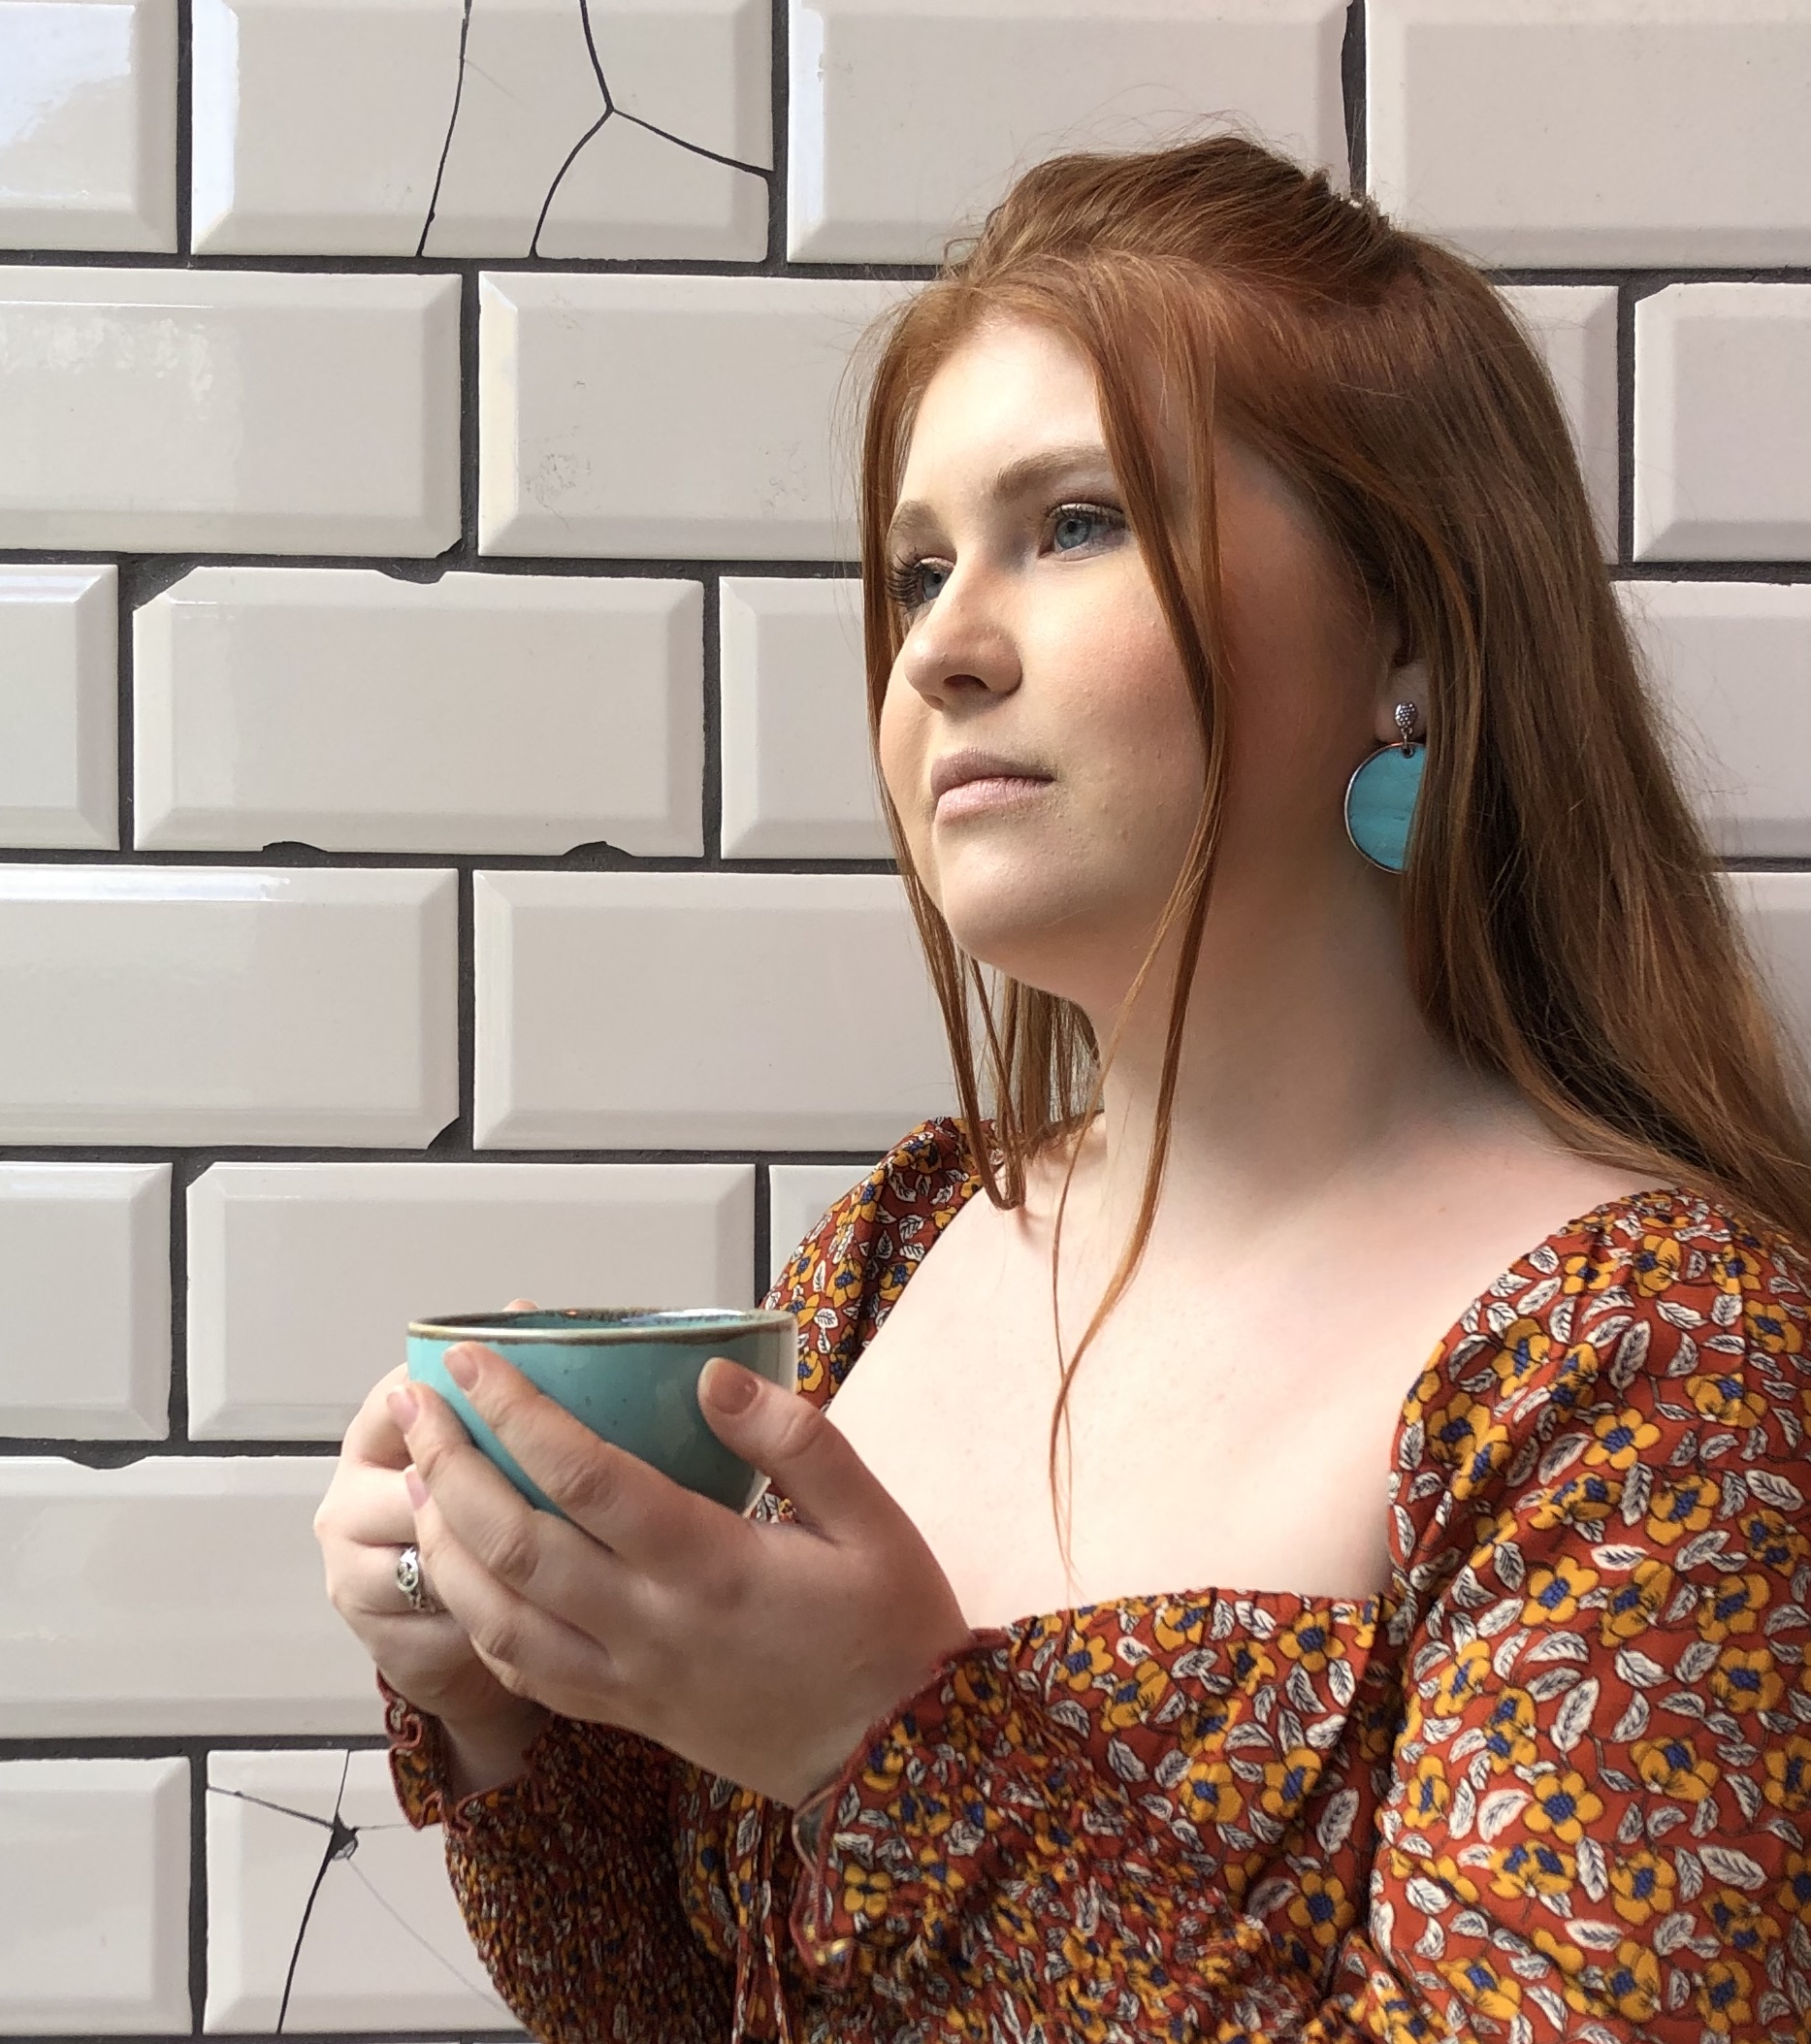 Charlotte is pictured sitting next to distressed white tiles. She holds a turquoise coffee cup which matches her earrings and looks off camera.